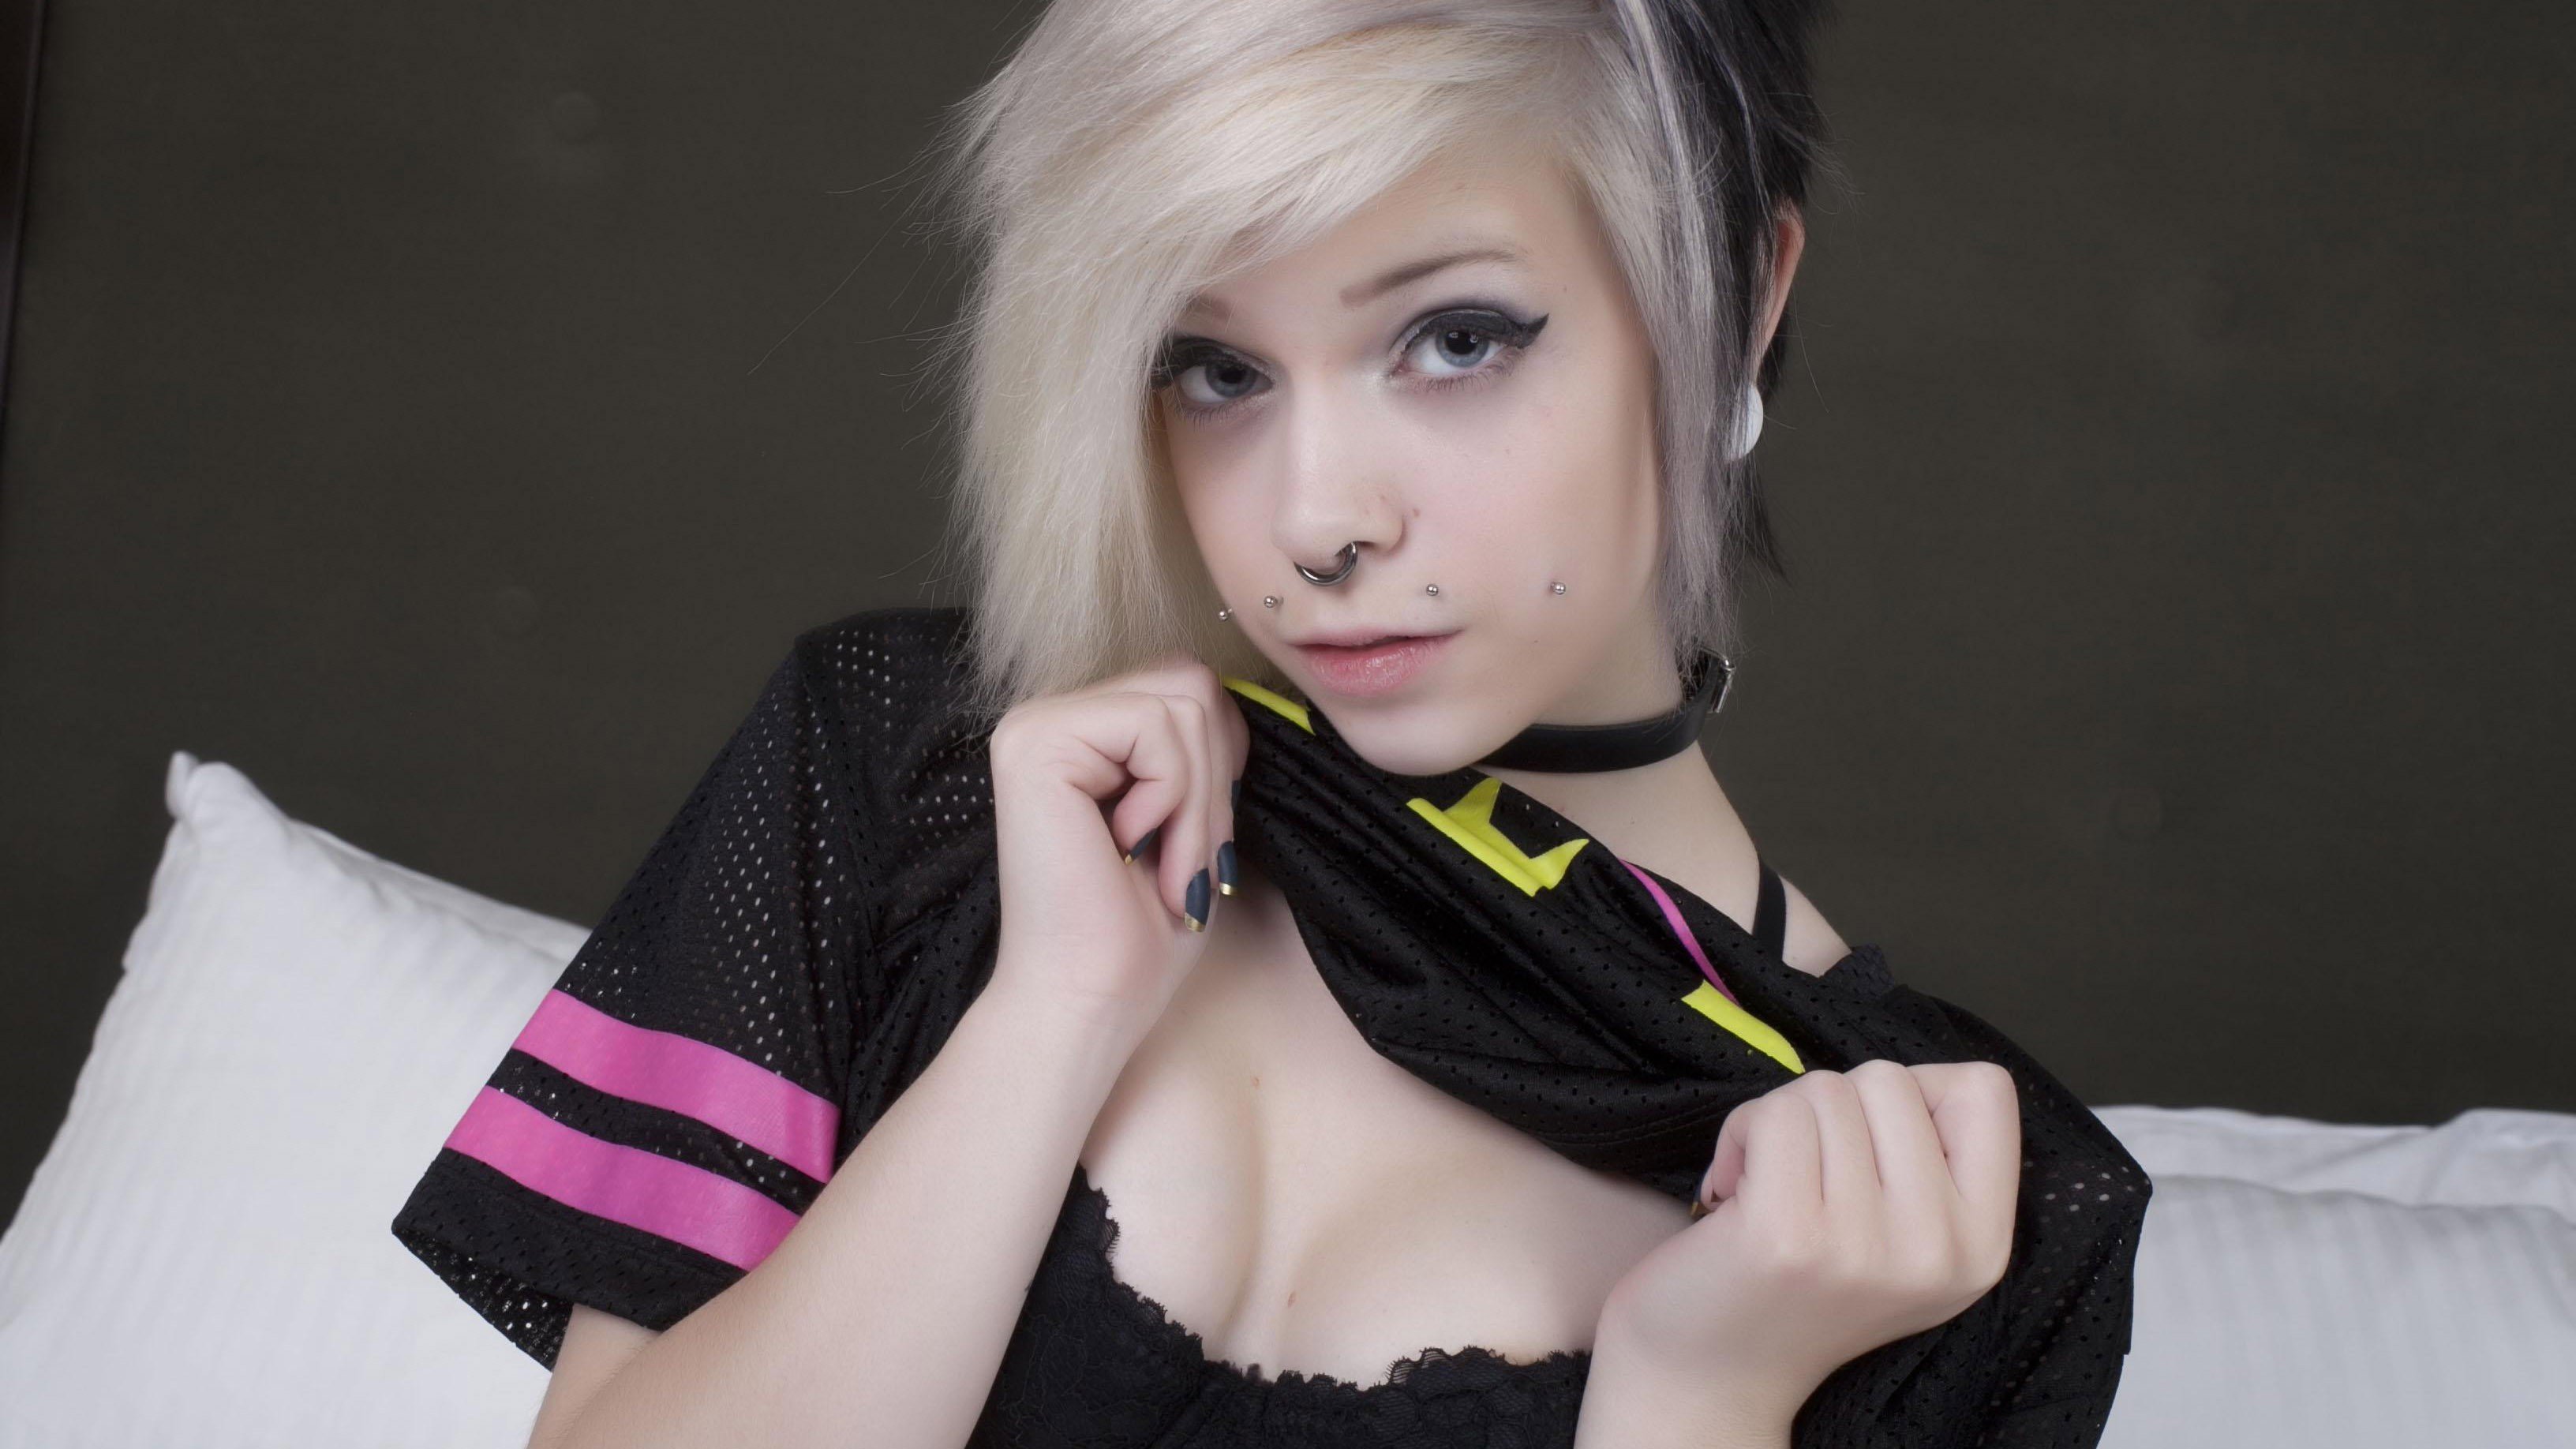 Cheshi Suicide Blonde Piercing Bra Nose Rings Hd Wallpapers Images, Photos, Reviews